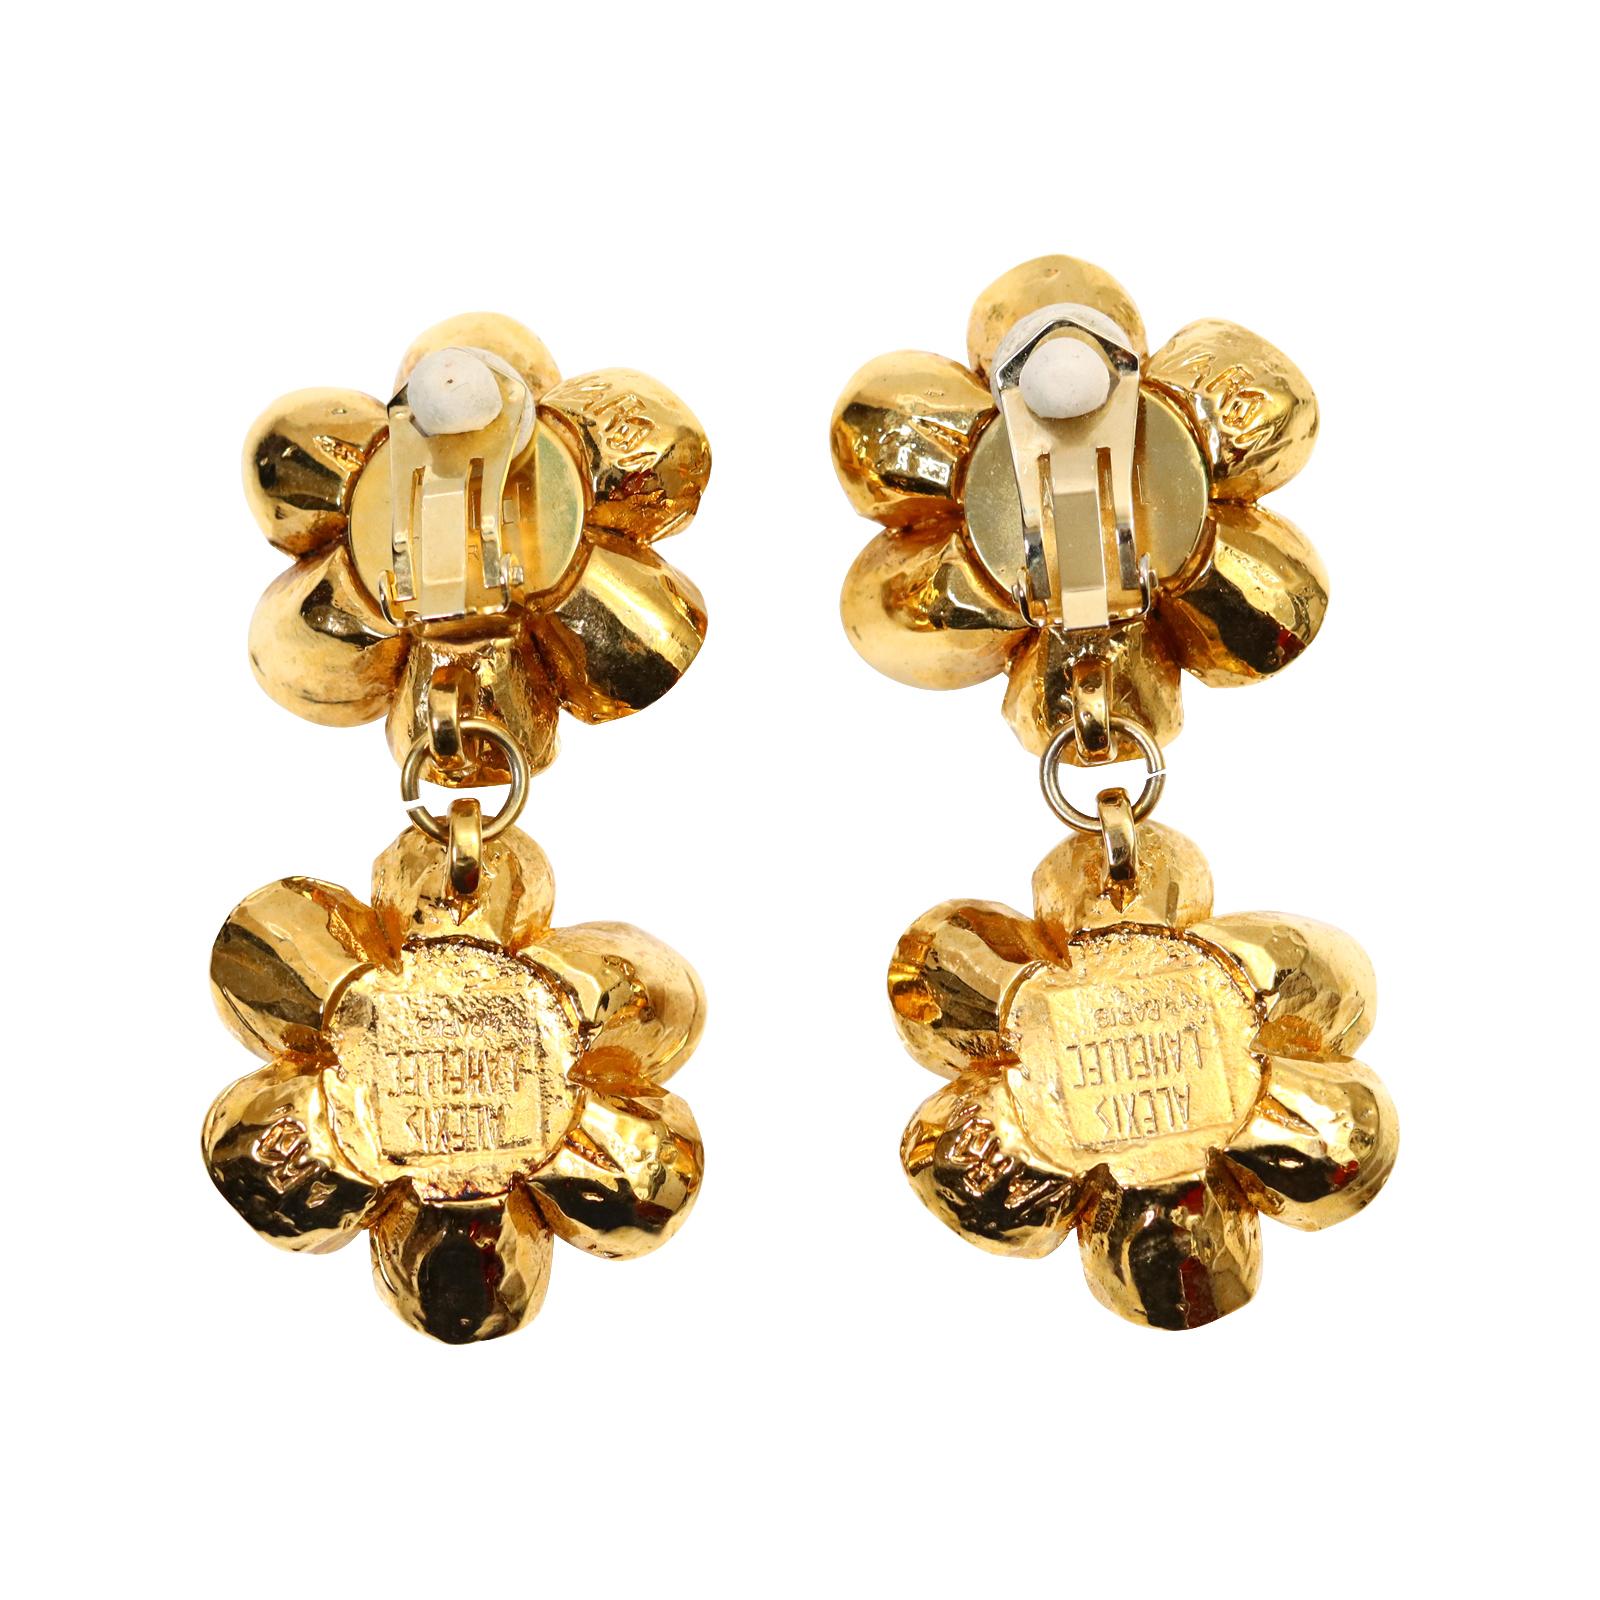 Artist Vintage Alexis Lahellec Gold Honeycomb Faux Pearl Dangling Earrings, circa 1980s For Sale